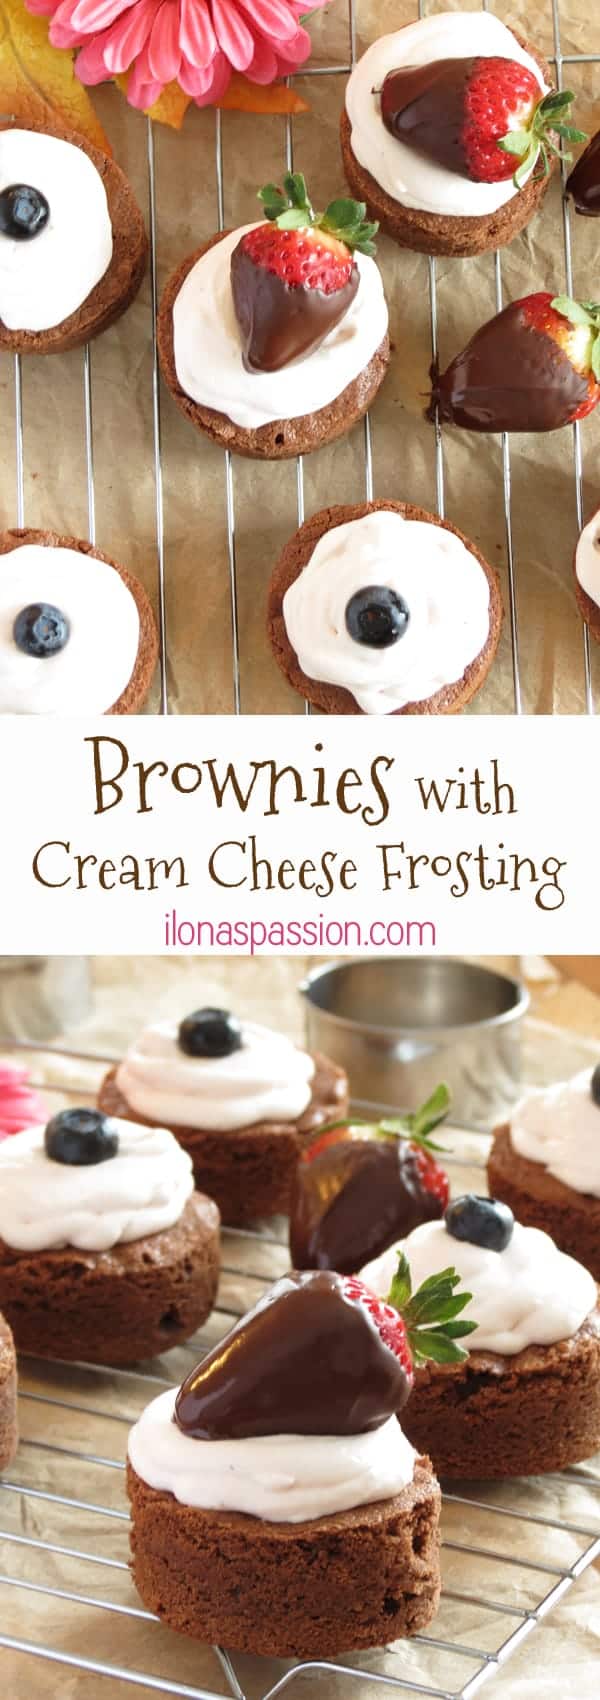 The Best Homemade Brownies with Cream Cheese Frosting by ilonaspassion.com